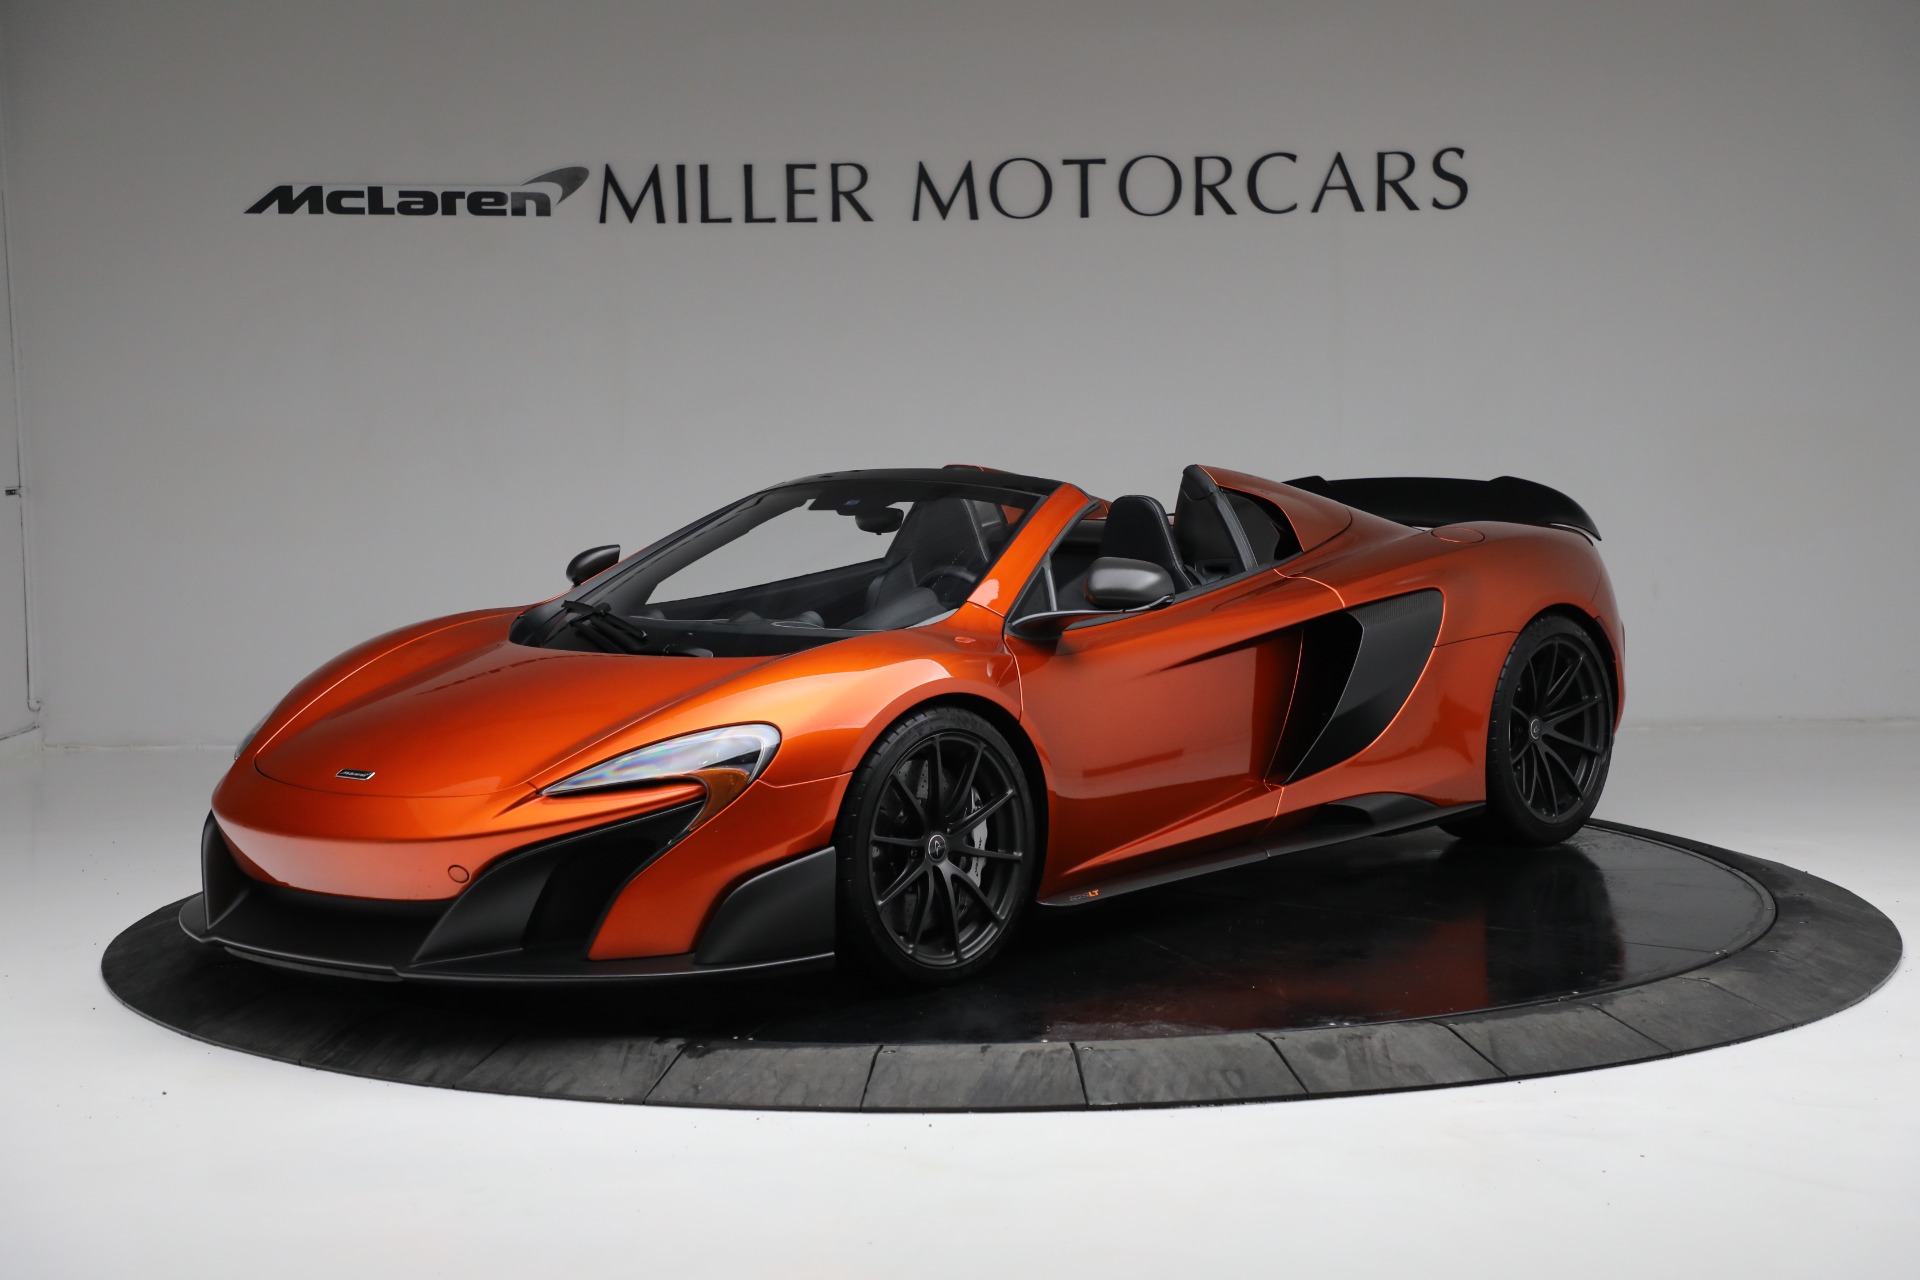 Used 2016 McLaren 675LT Spider for sale $323,900 at Bentley Greenwich in Greenwich CT 06830 1